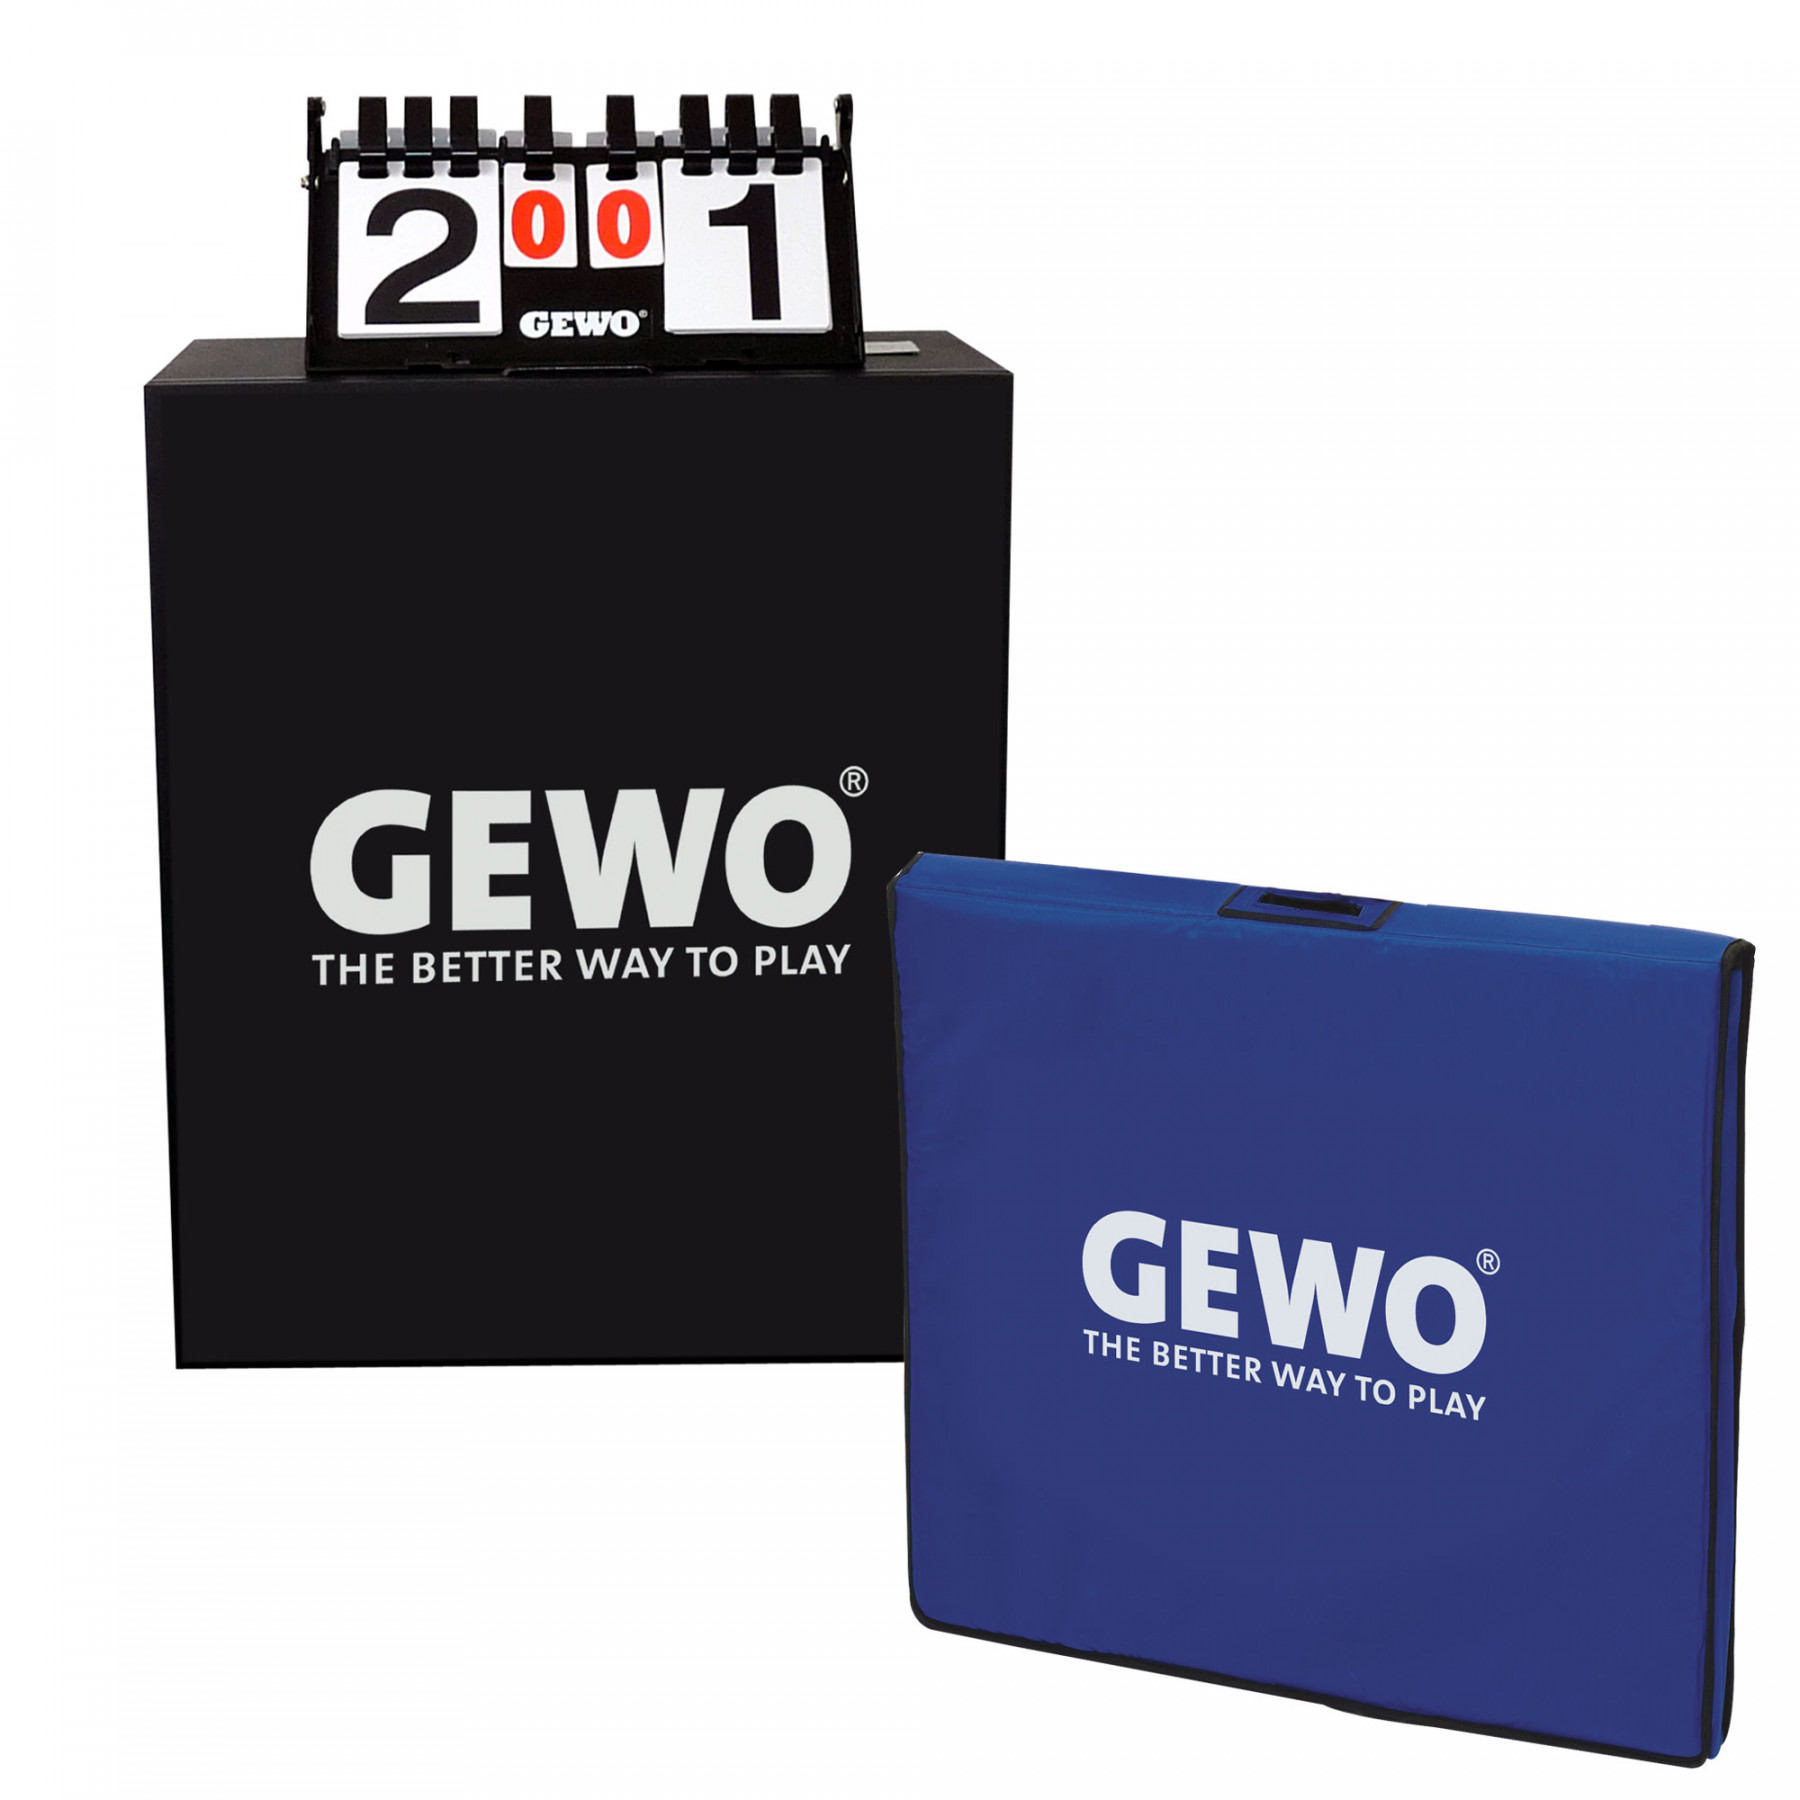 GEWO Referee Table incl.protection covering 1b quality